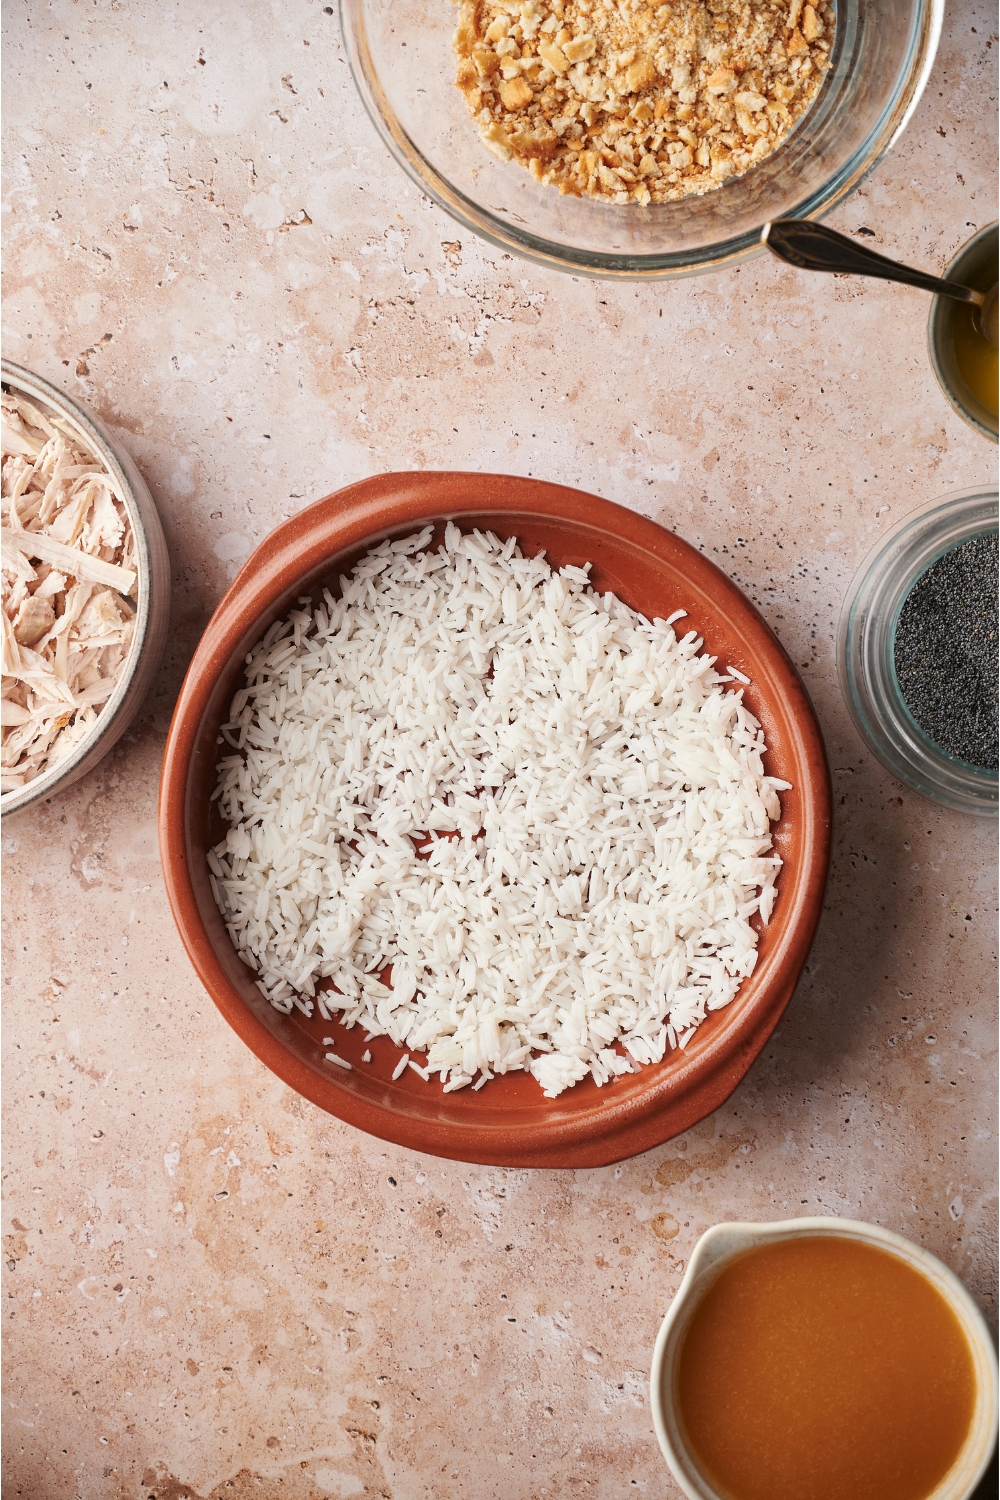 A red casserole dish with a layer of cooked white rice. Surrounding the dish there are bowls of ingredients including cracker crumbs, poppy seeds, shredded chicken, and broth.